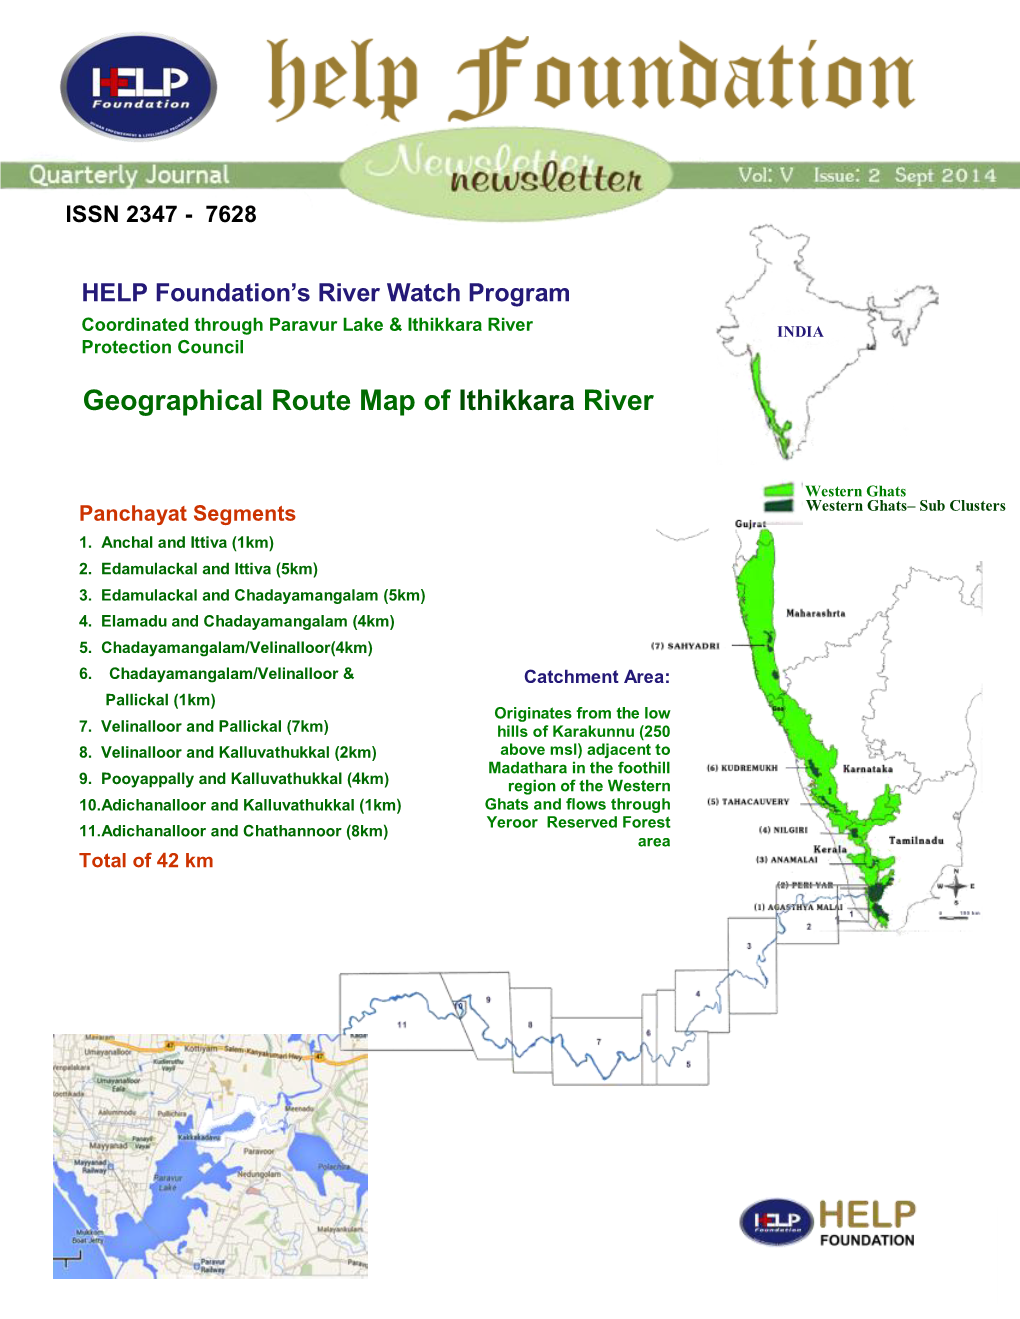 Geographical Route Map of Ithikkara River